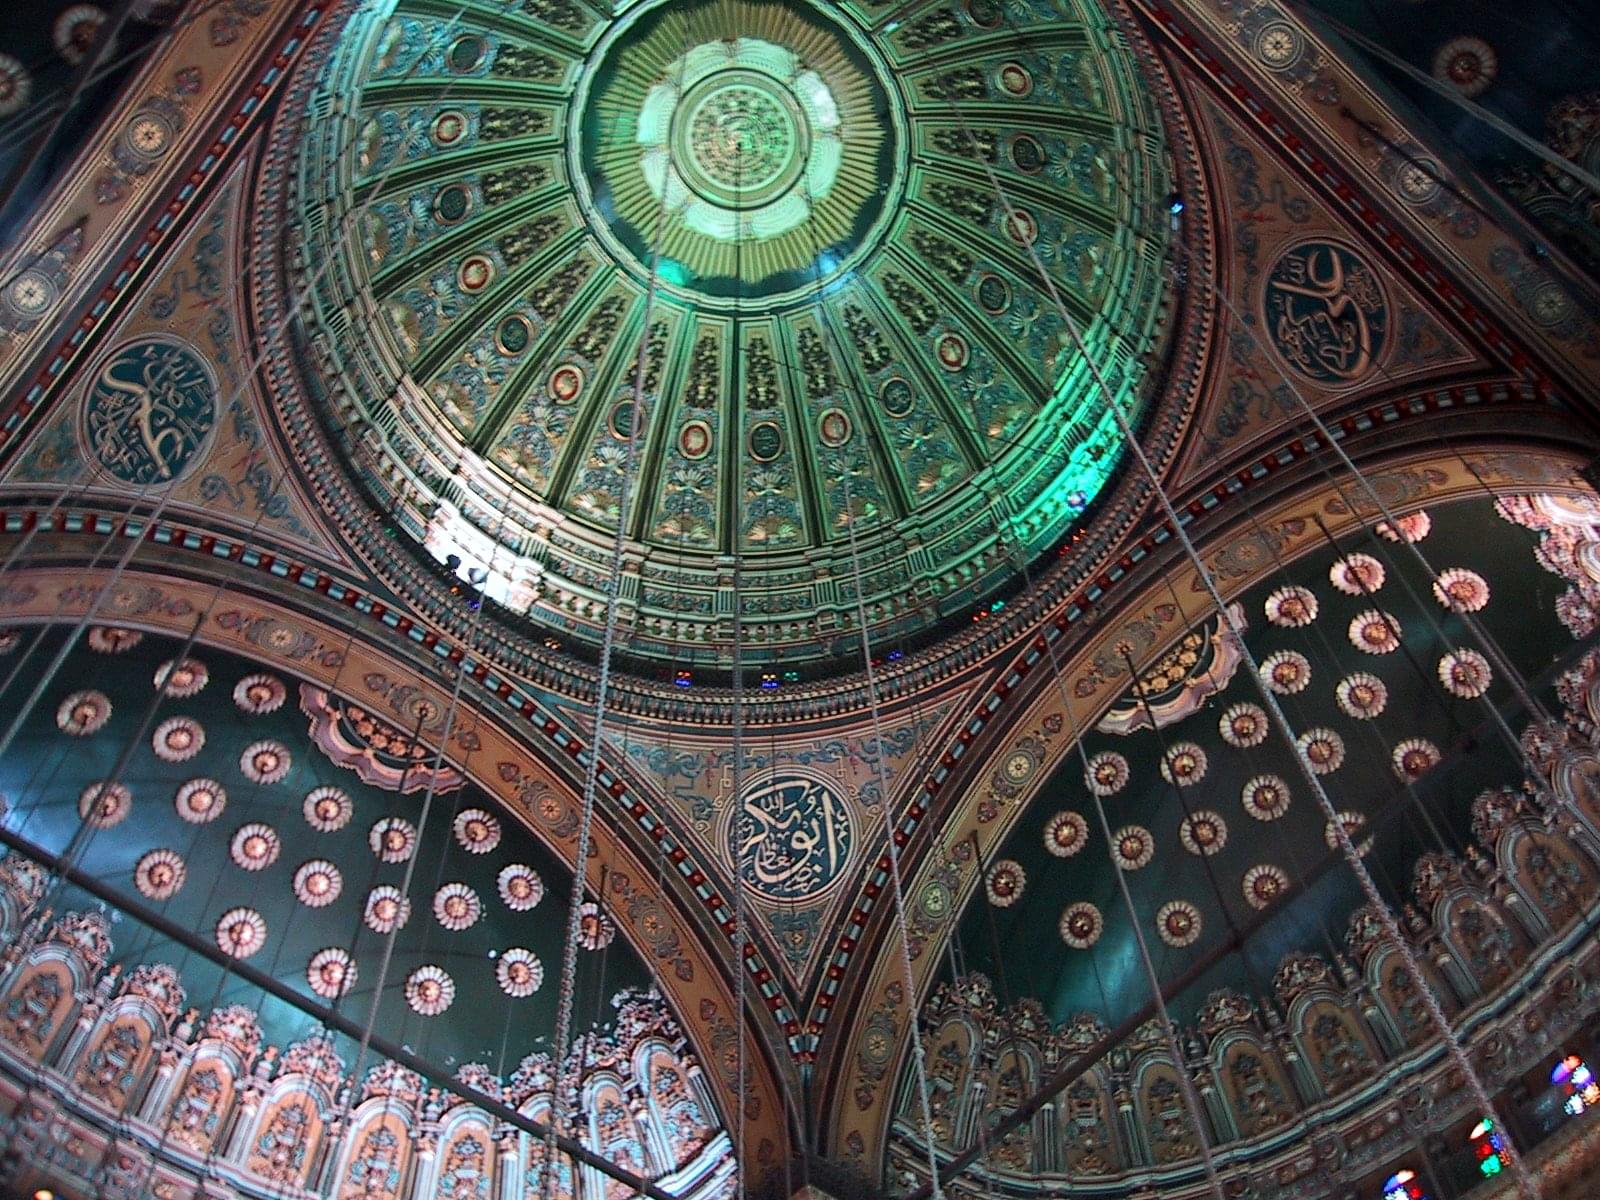 Witness the Splendour of the Central Dome